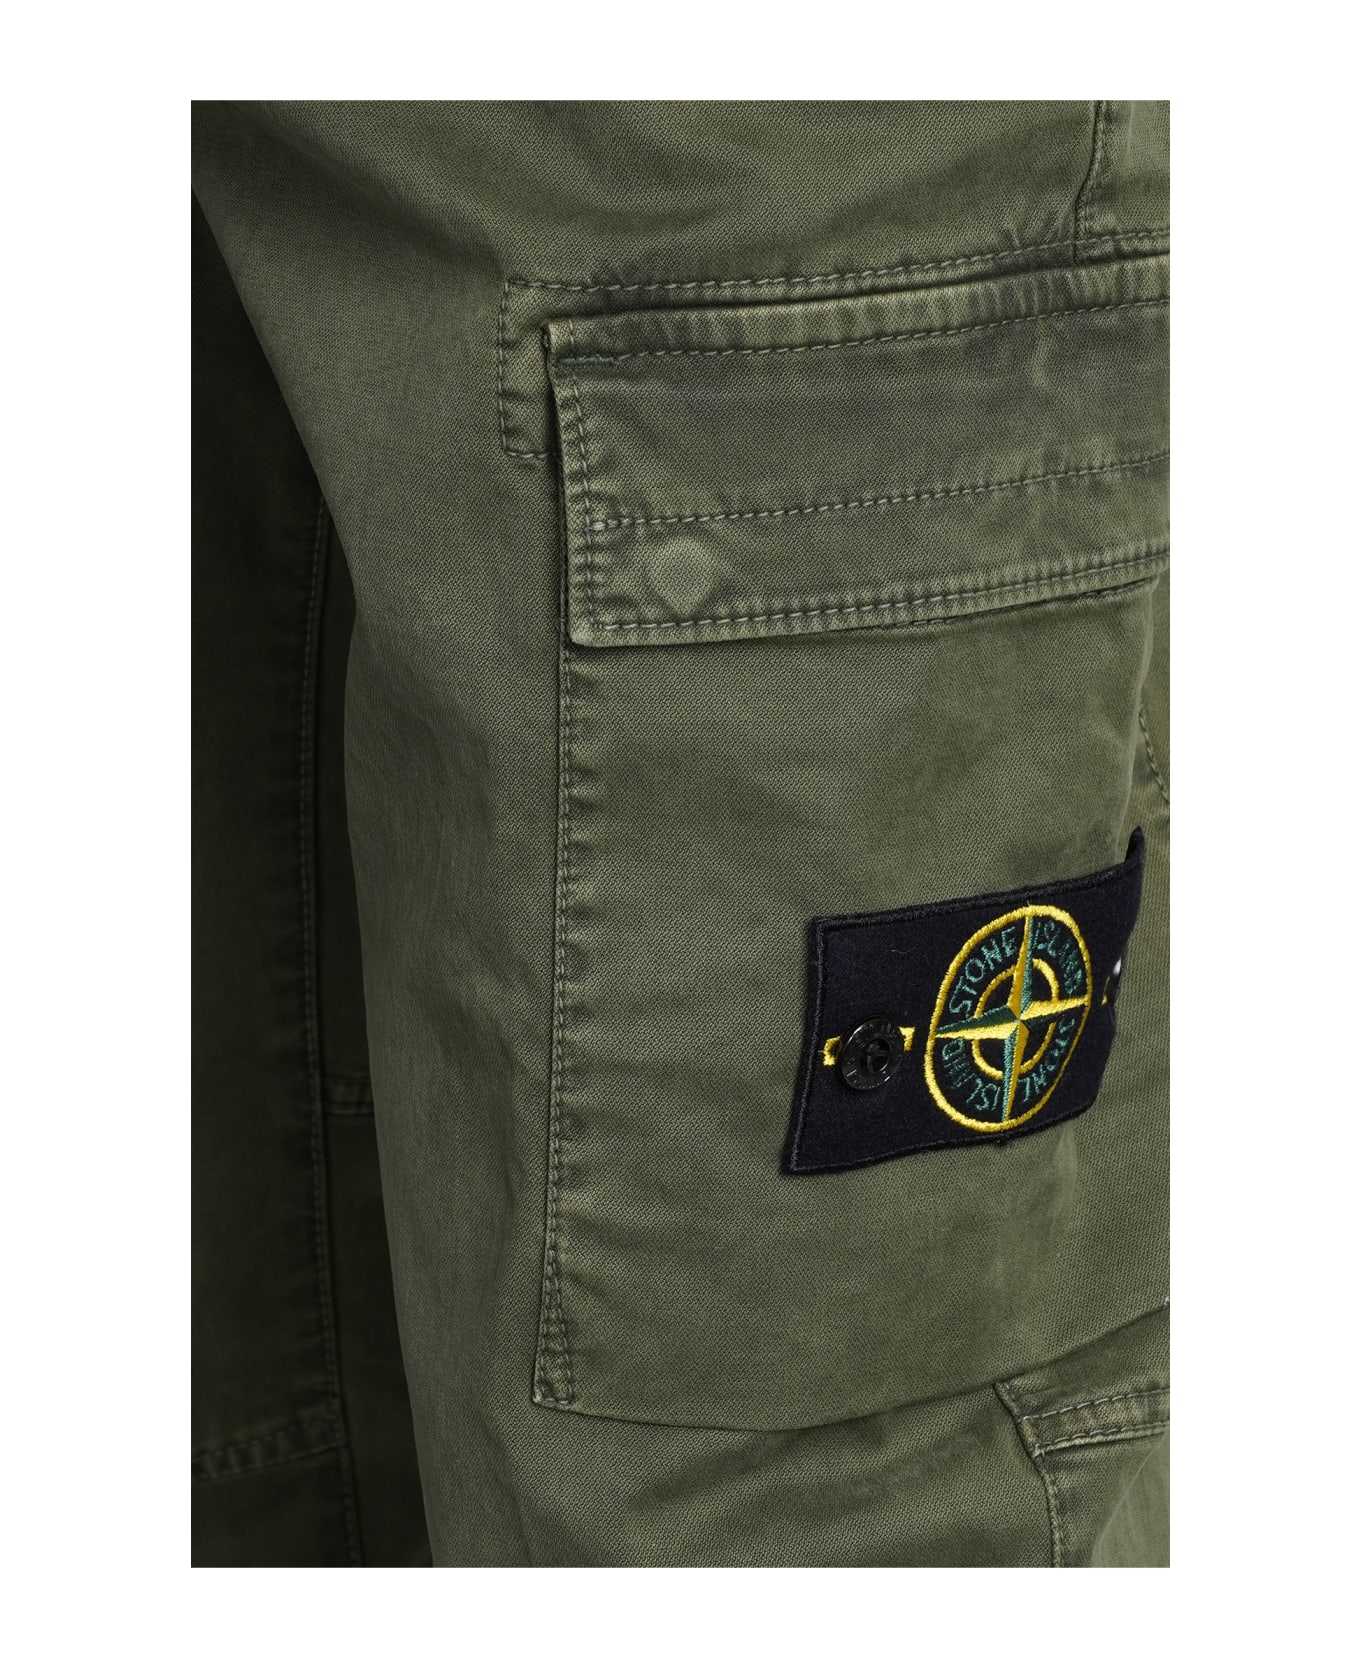 Stone Island Pants In Green Cotton - Olive